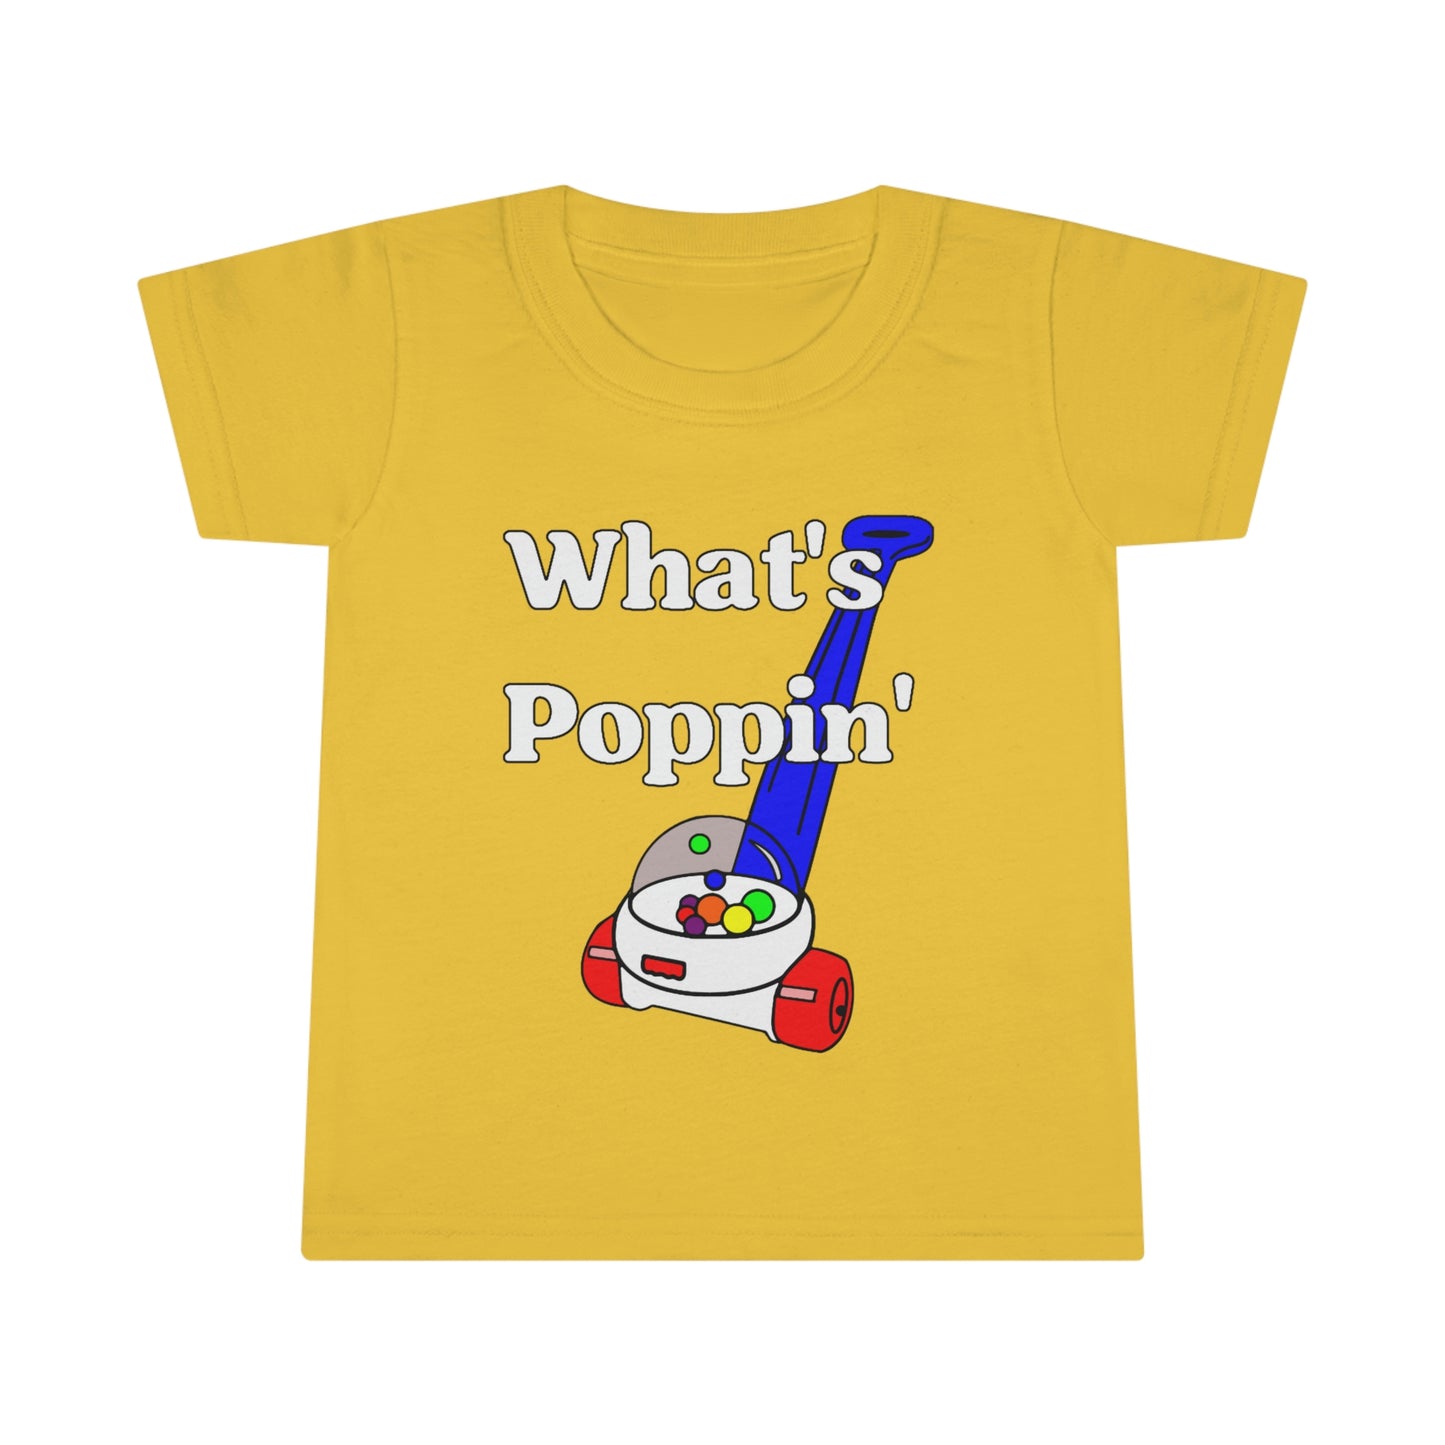 "What's Poppin?" Toddler T-shirt (2T-6T)